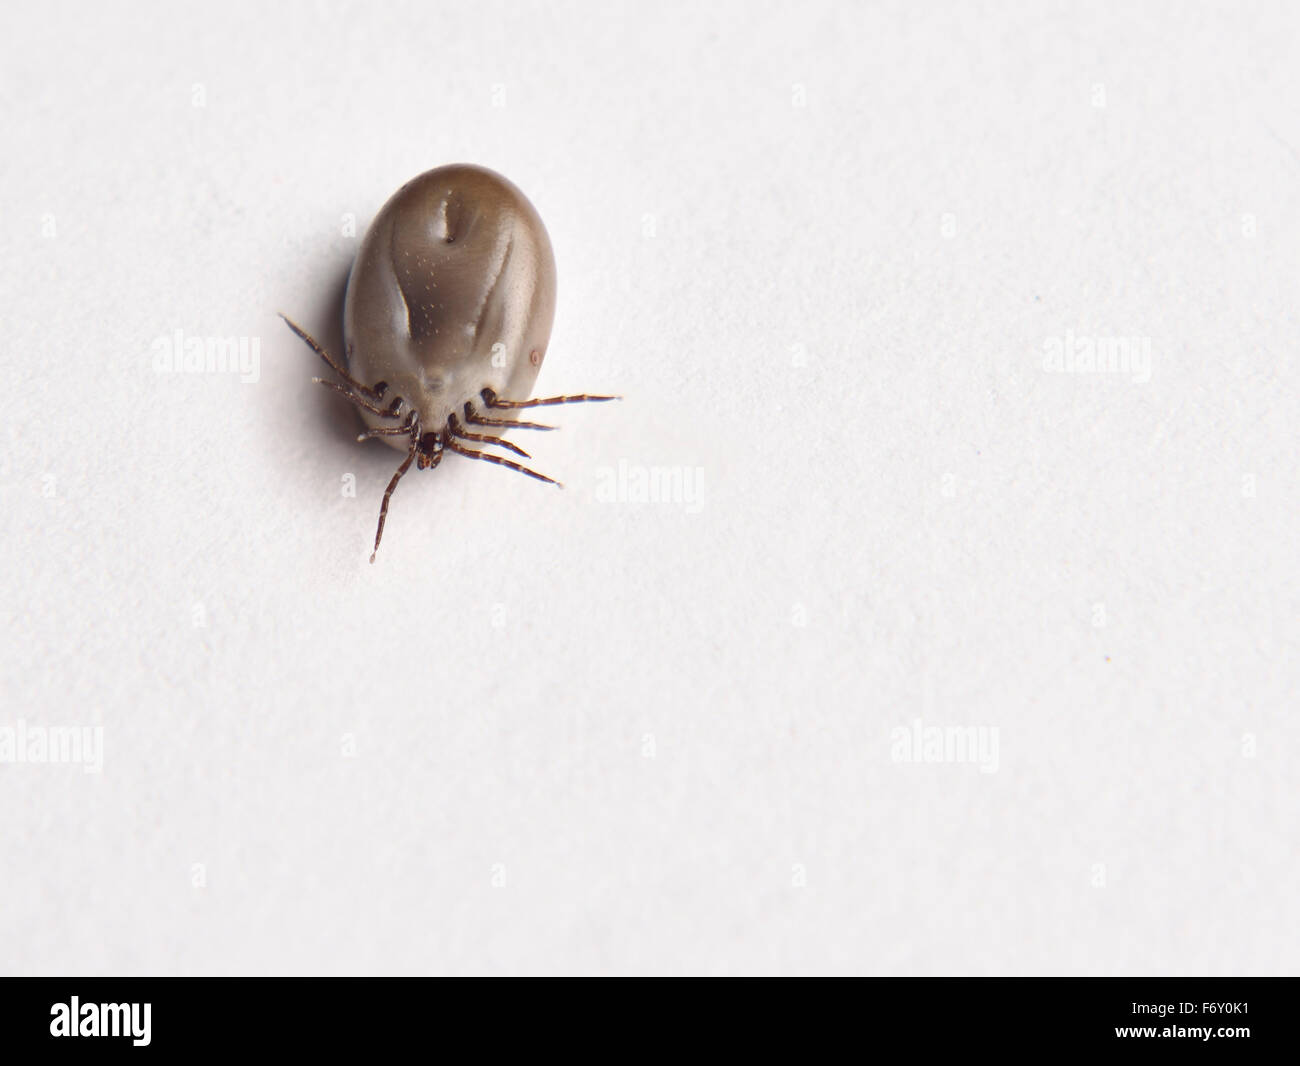 Bottom view of an engorged female Blacklegged Deer tick on white paper Stock Photo